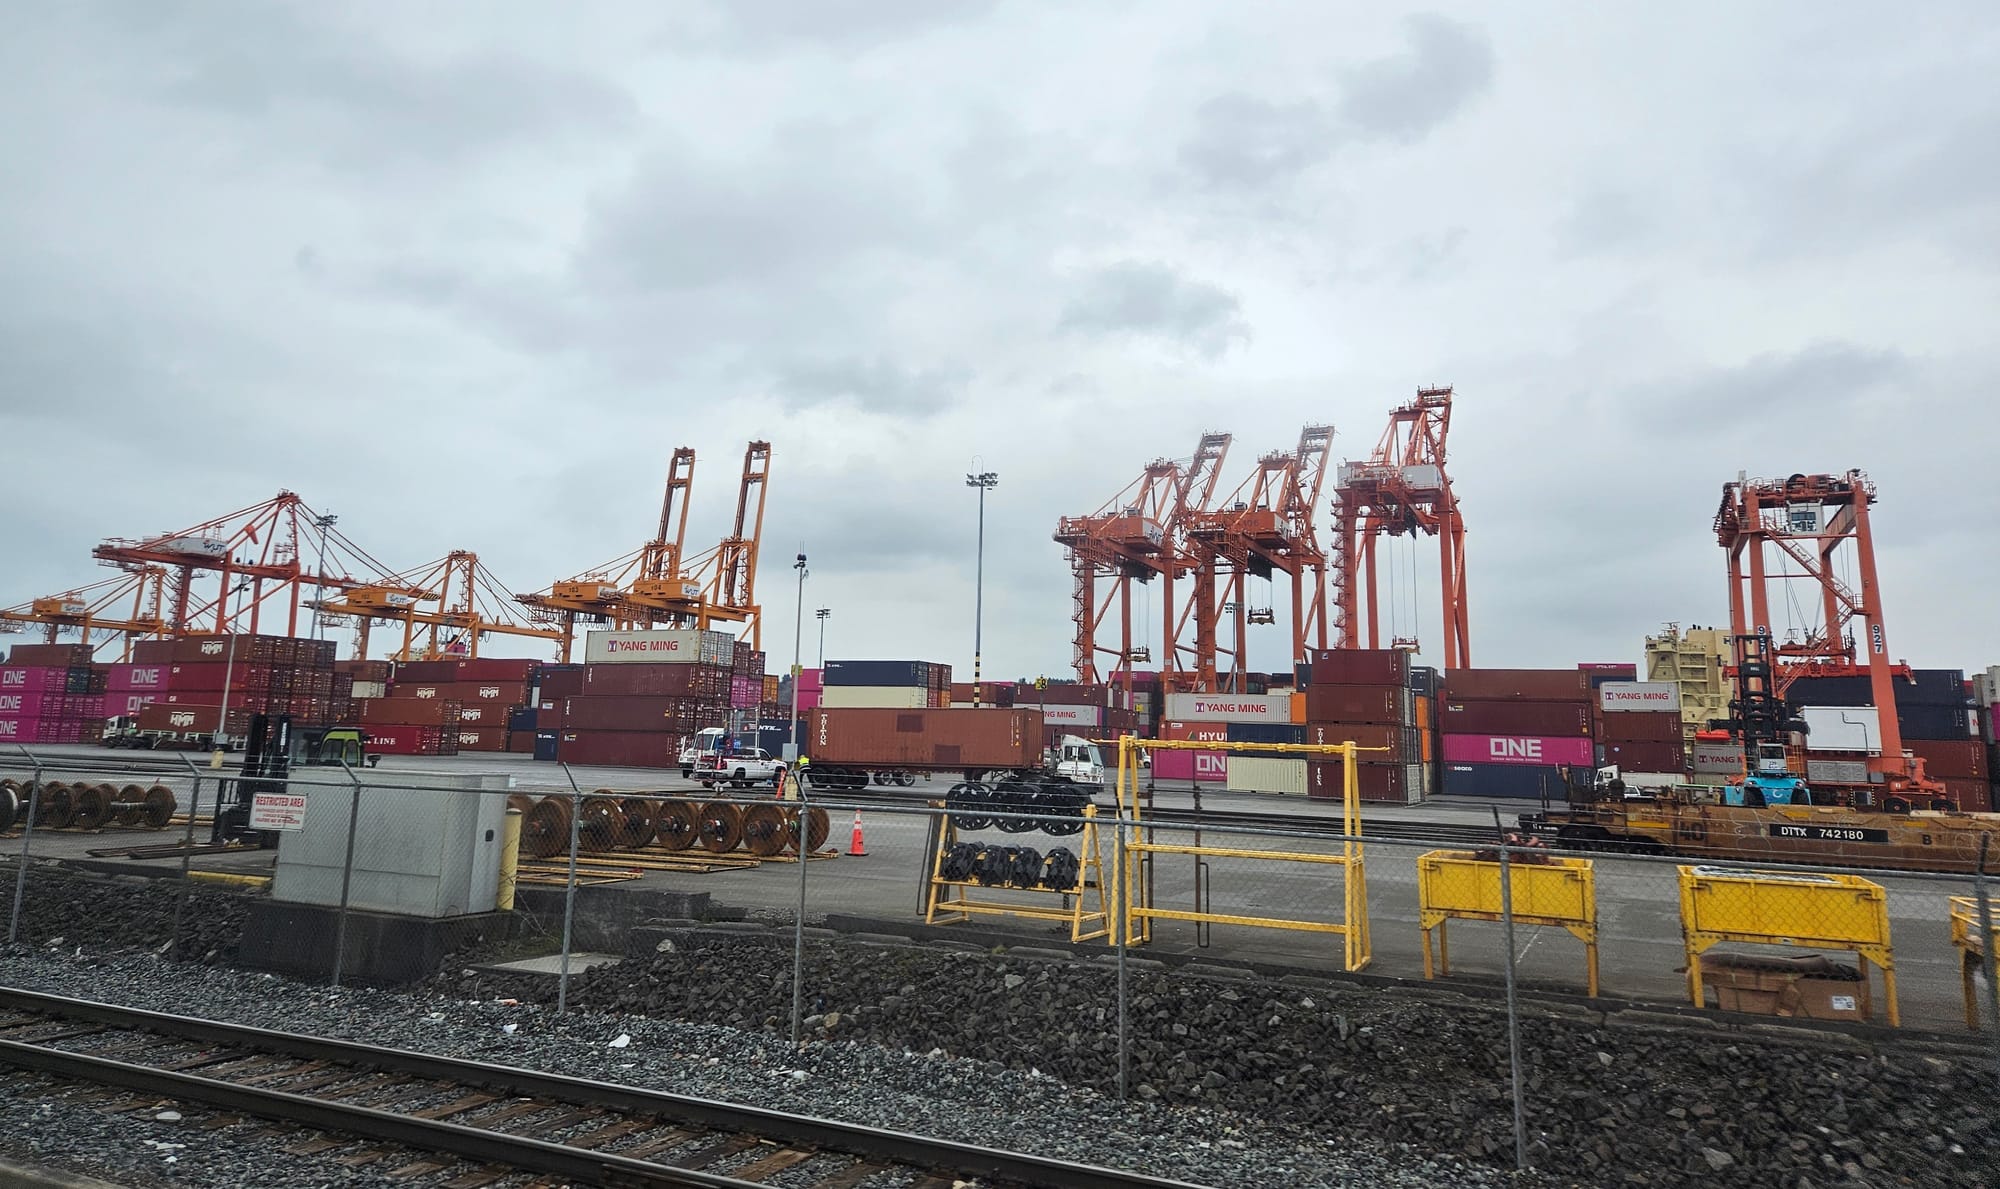 Tall yellow and orange shipping cranes lined up behind shipping containers.